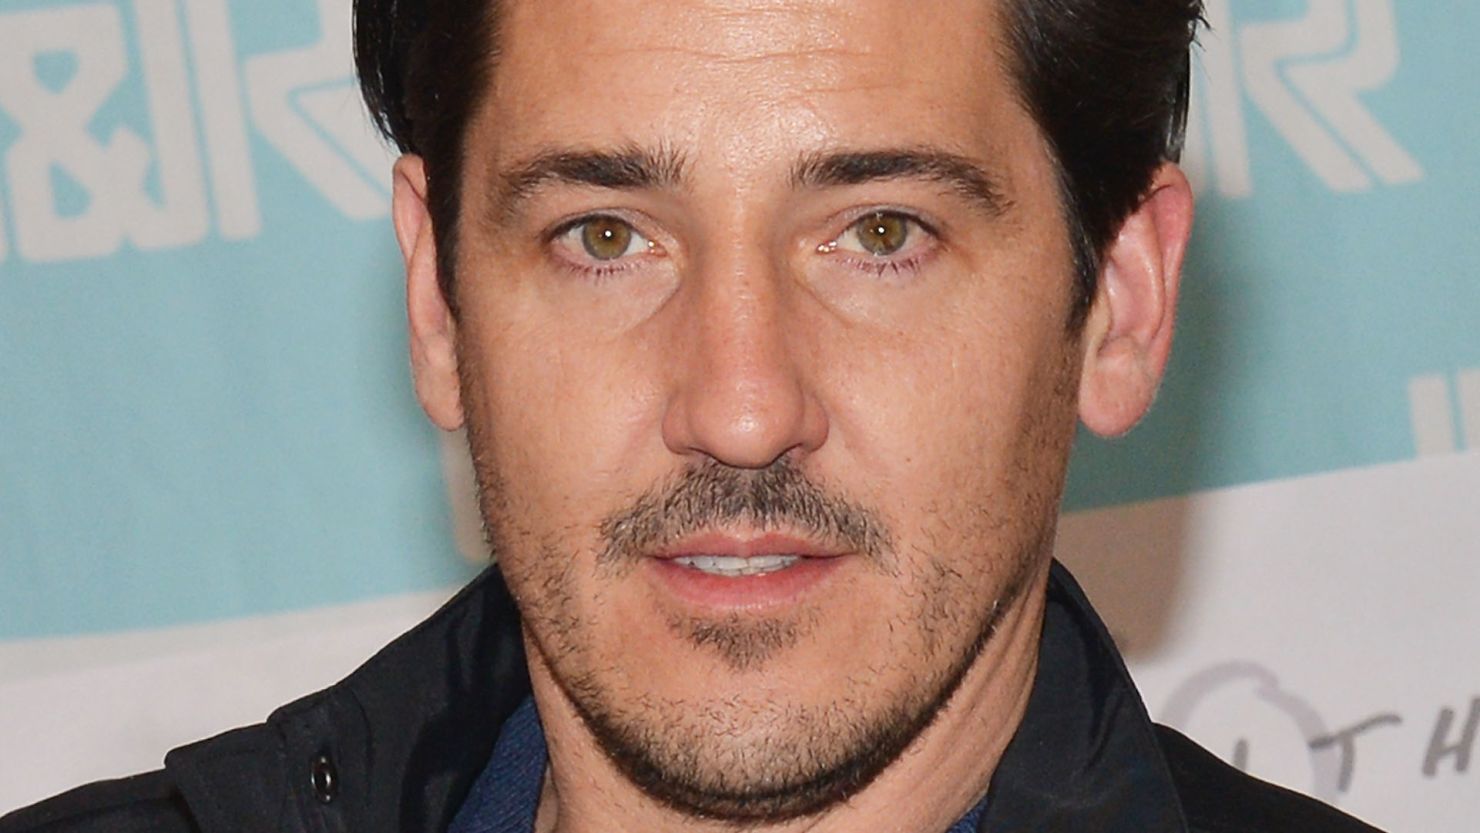 Jonathan Knight was reportedly texting on his phone during the performance.